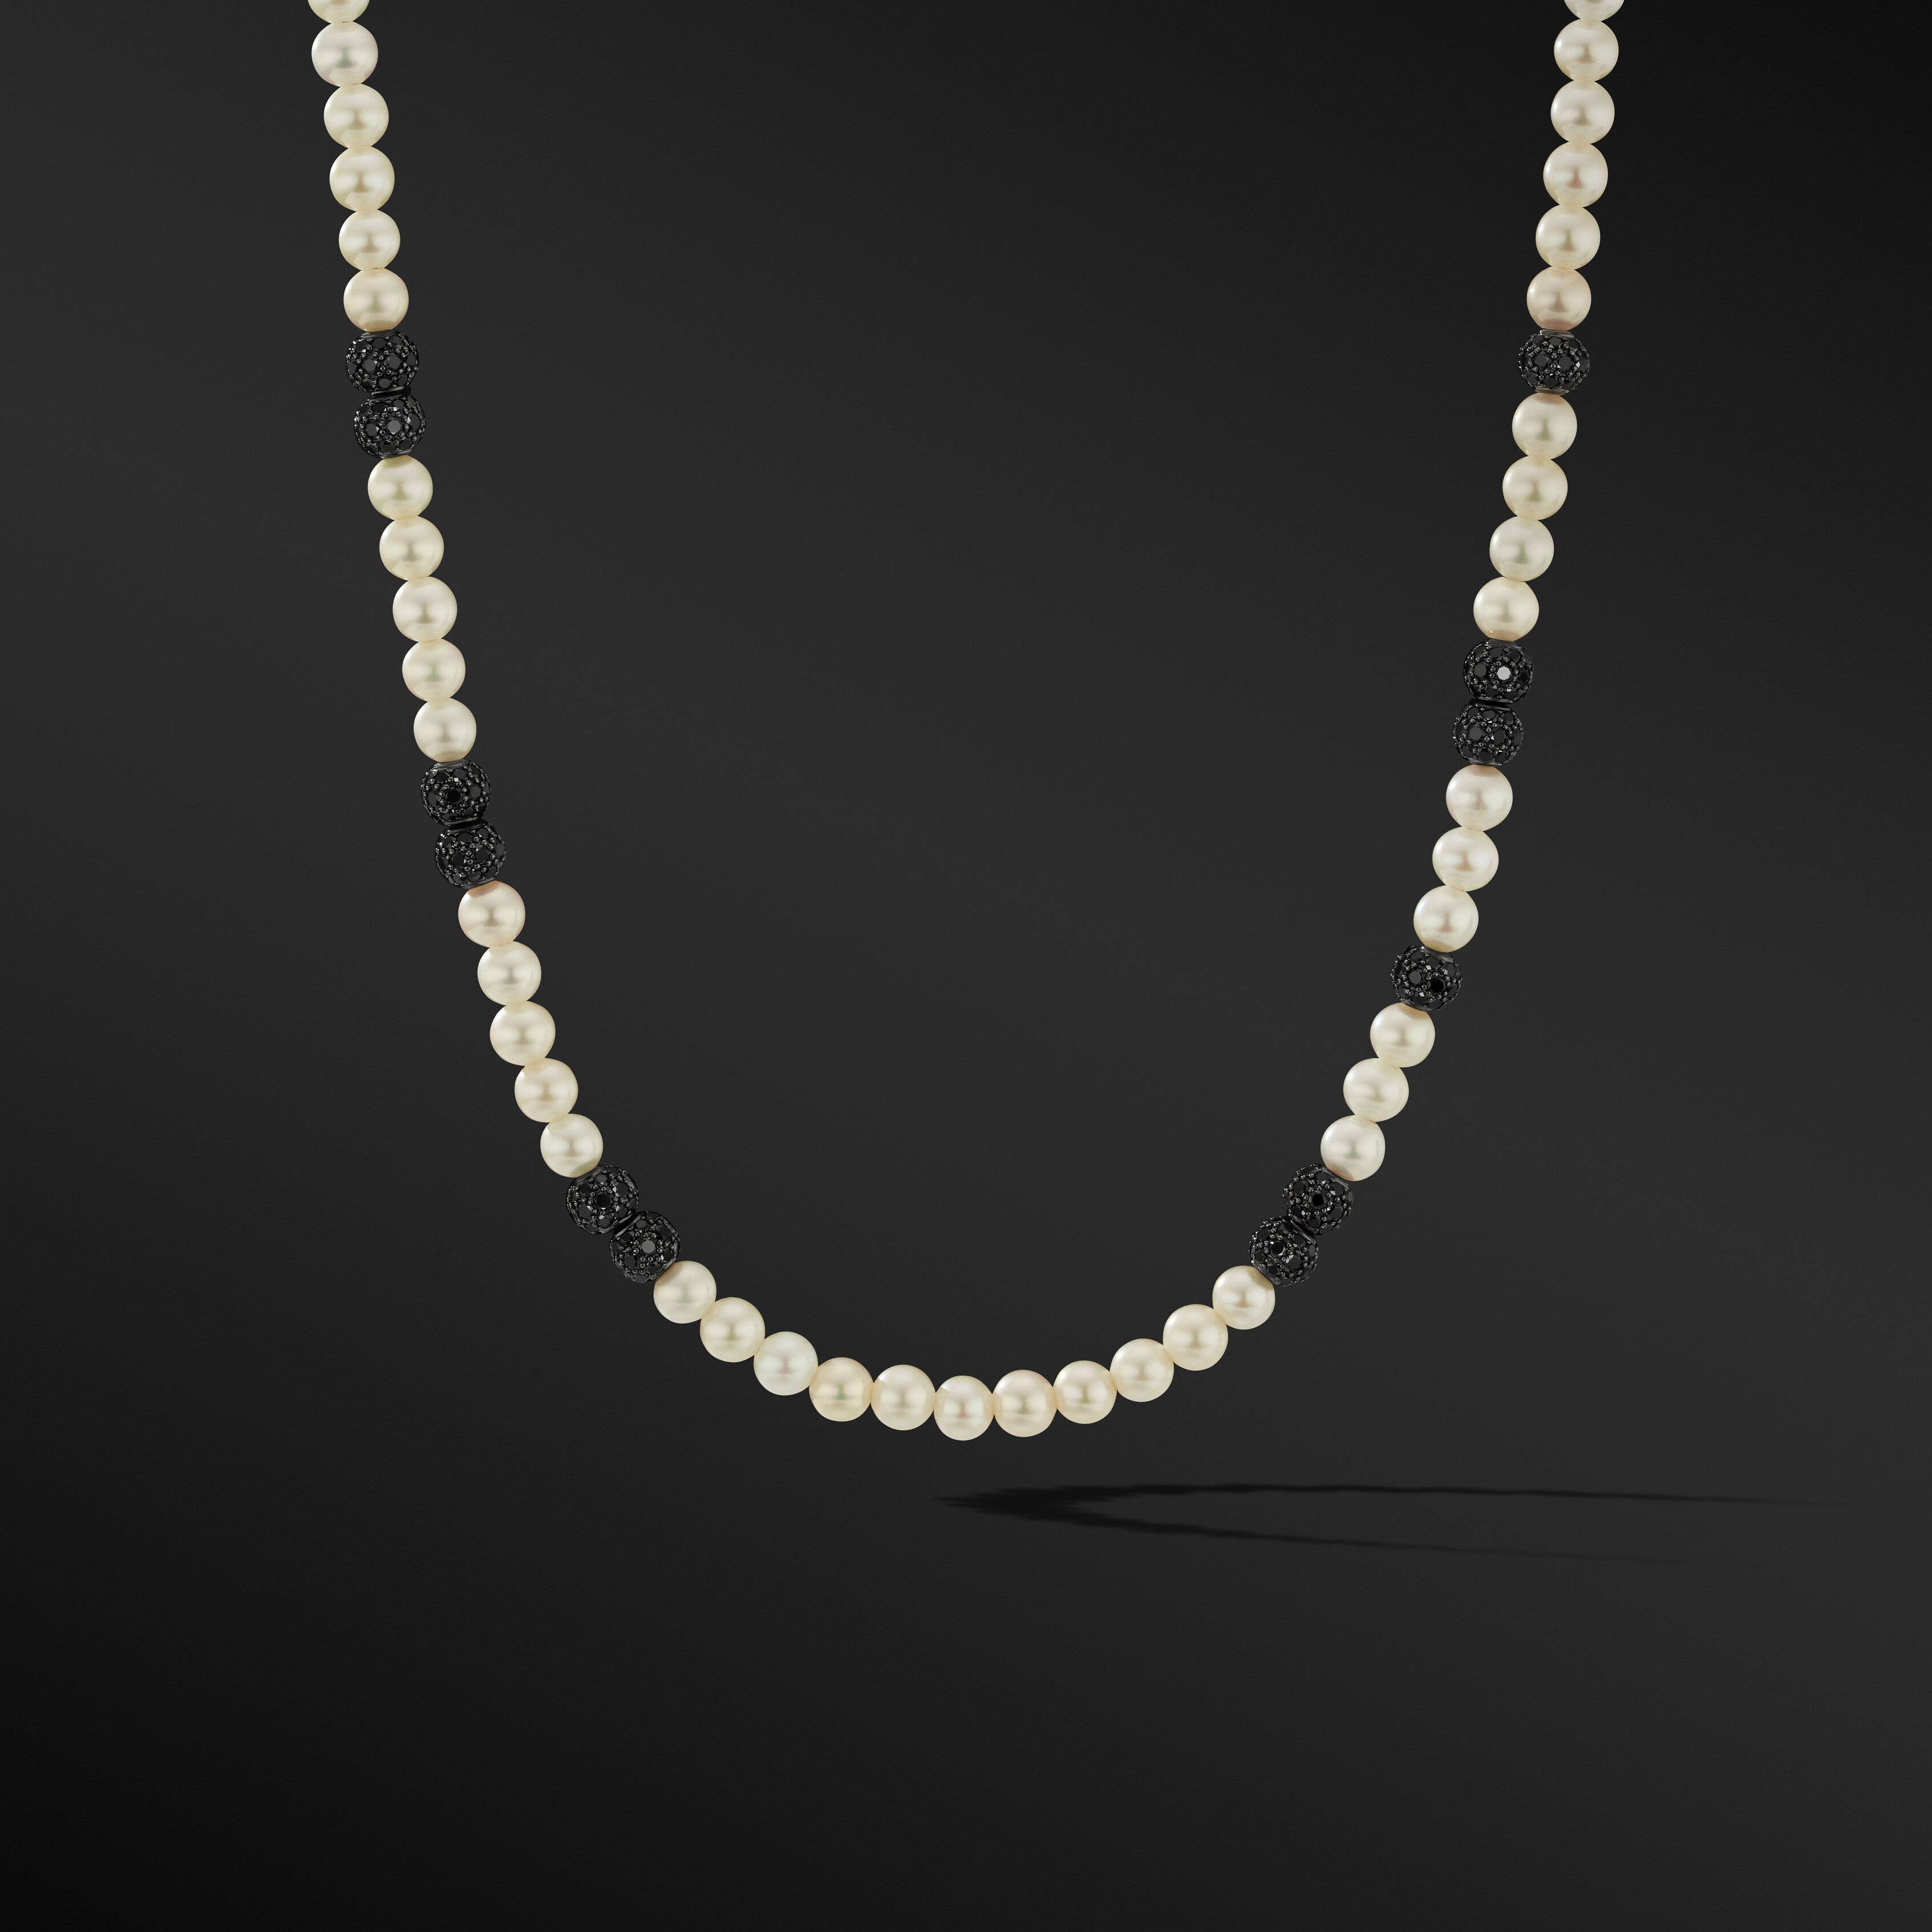 Spiritual Beads Necklace in Sterling Silver with Pearls and Pavé Black Diamonds